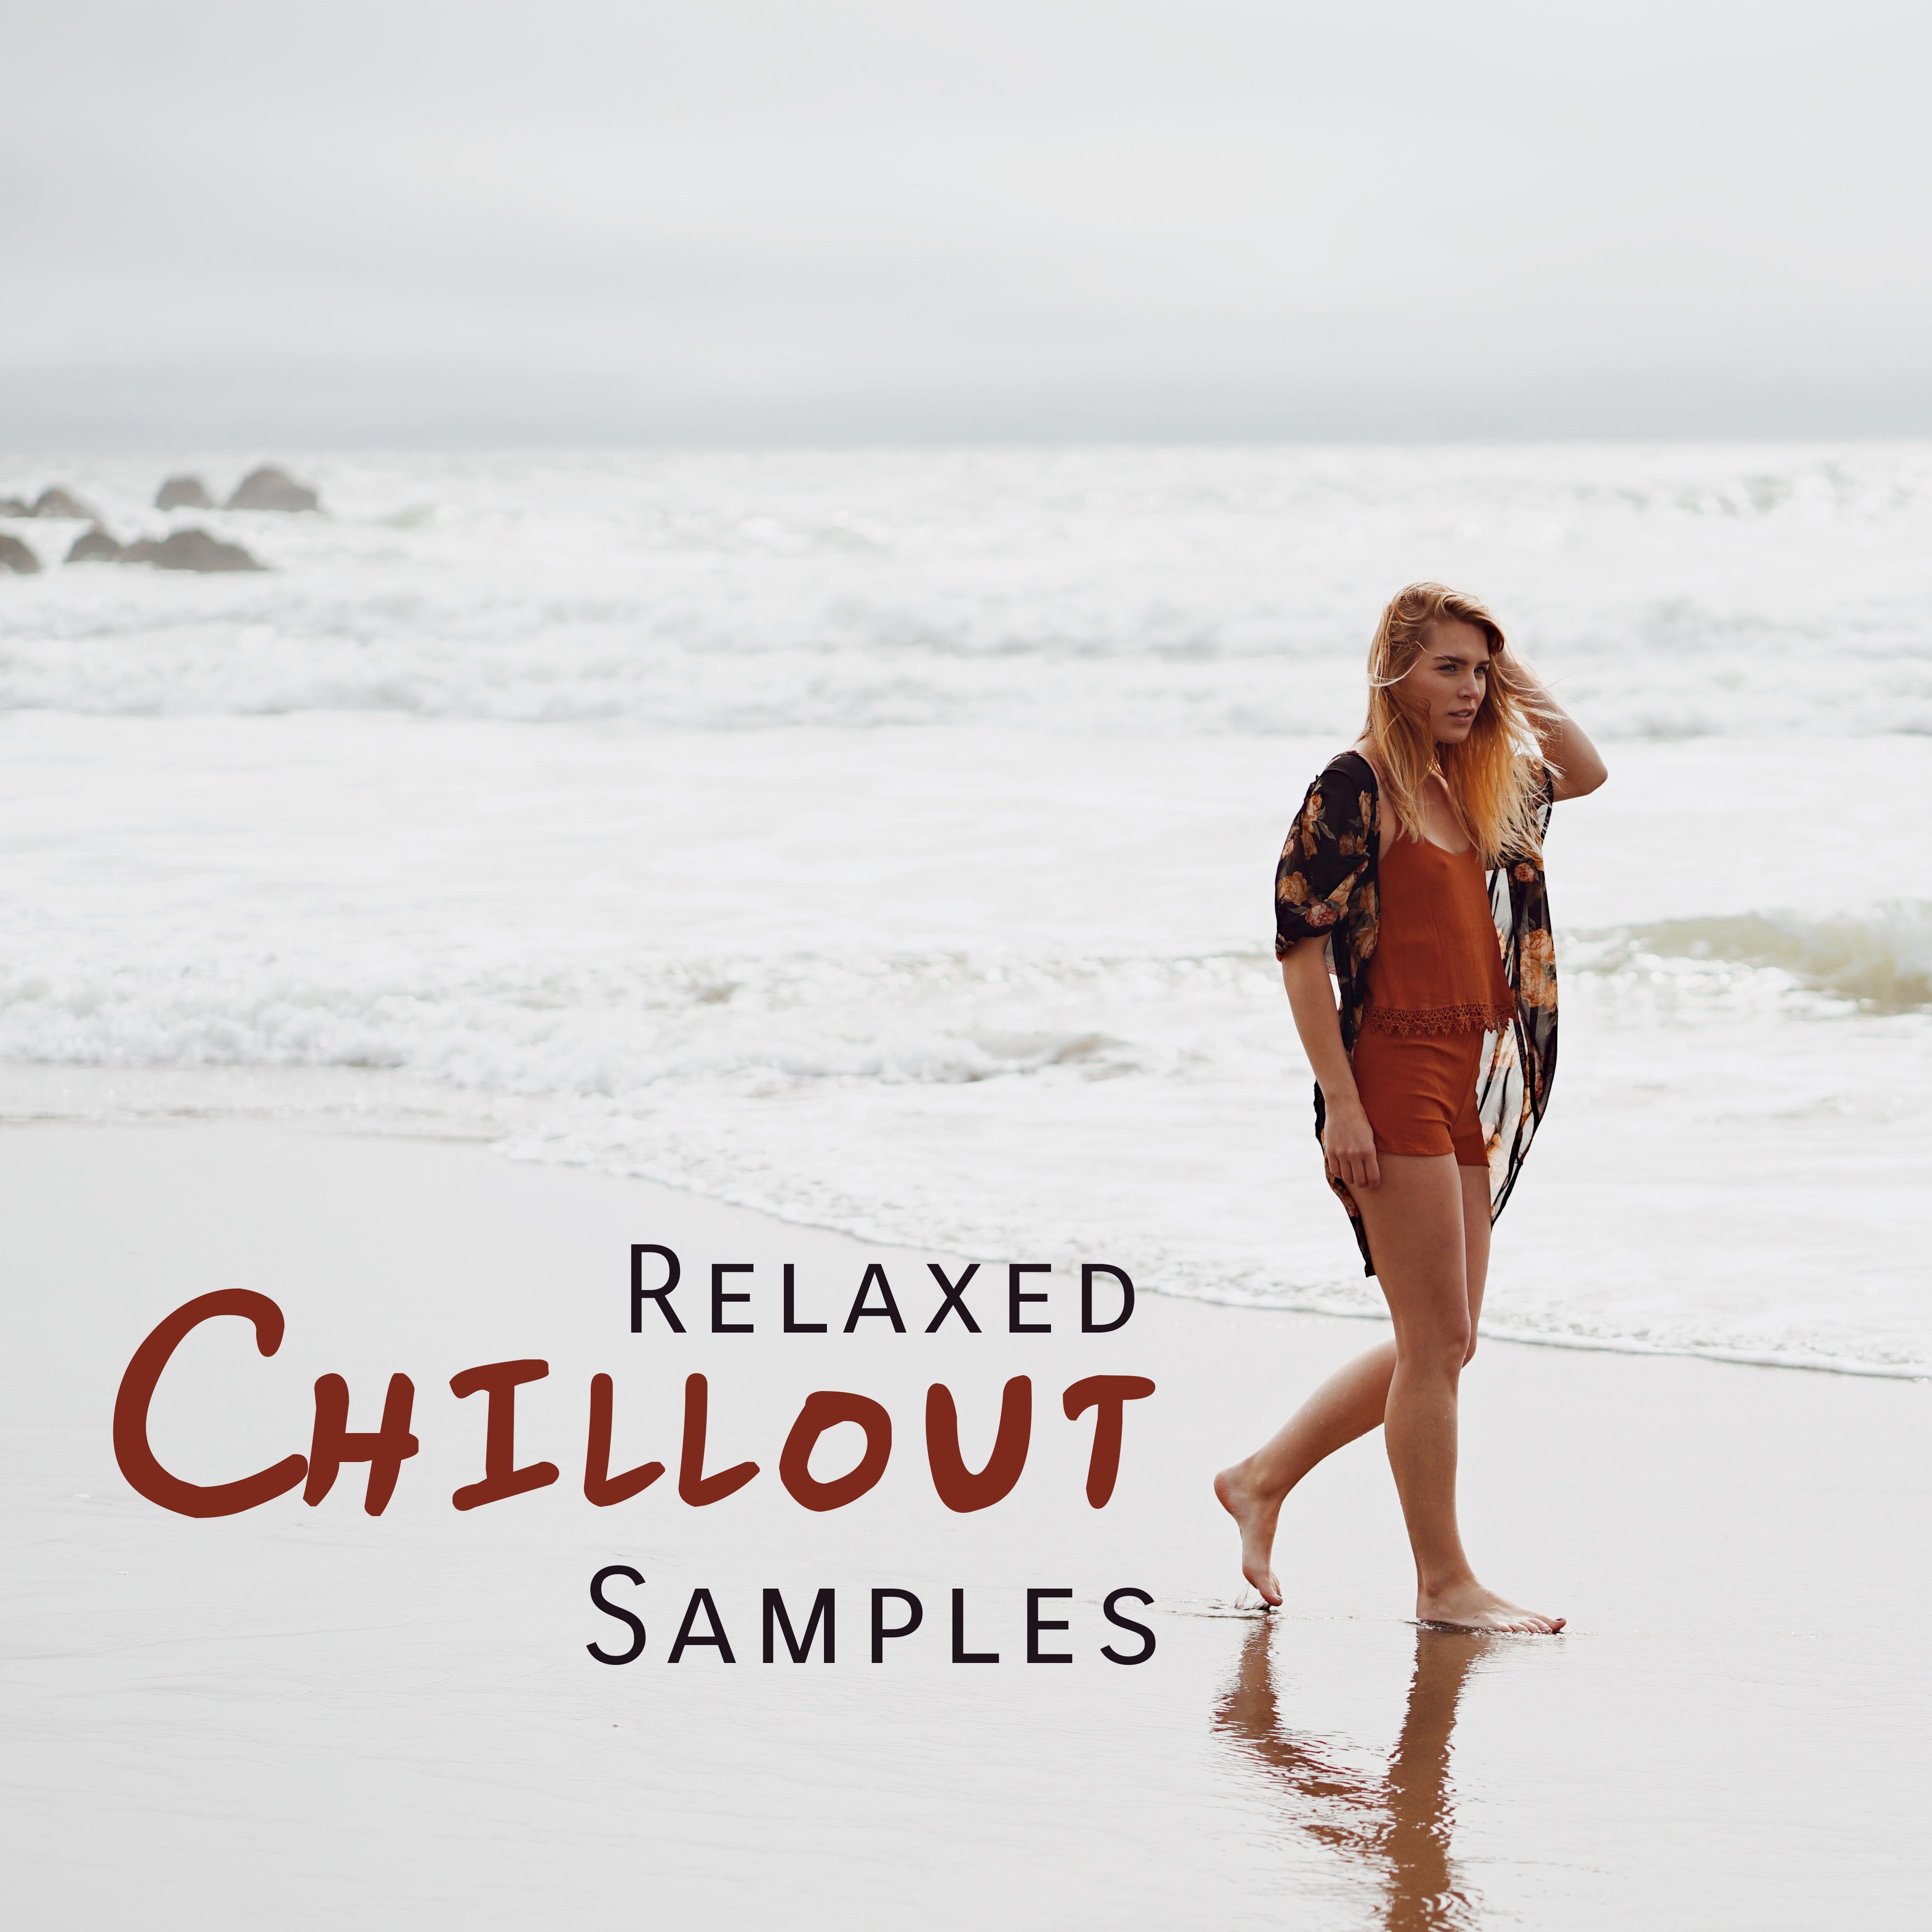 Relaxed Chillout Samples – Chill Out Music, 2017 Party Hits, Ibiza, Mr Chillout